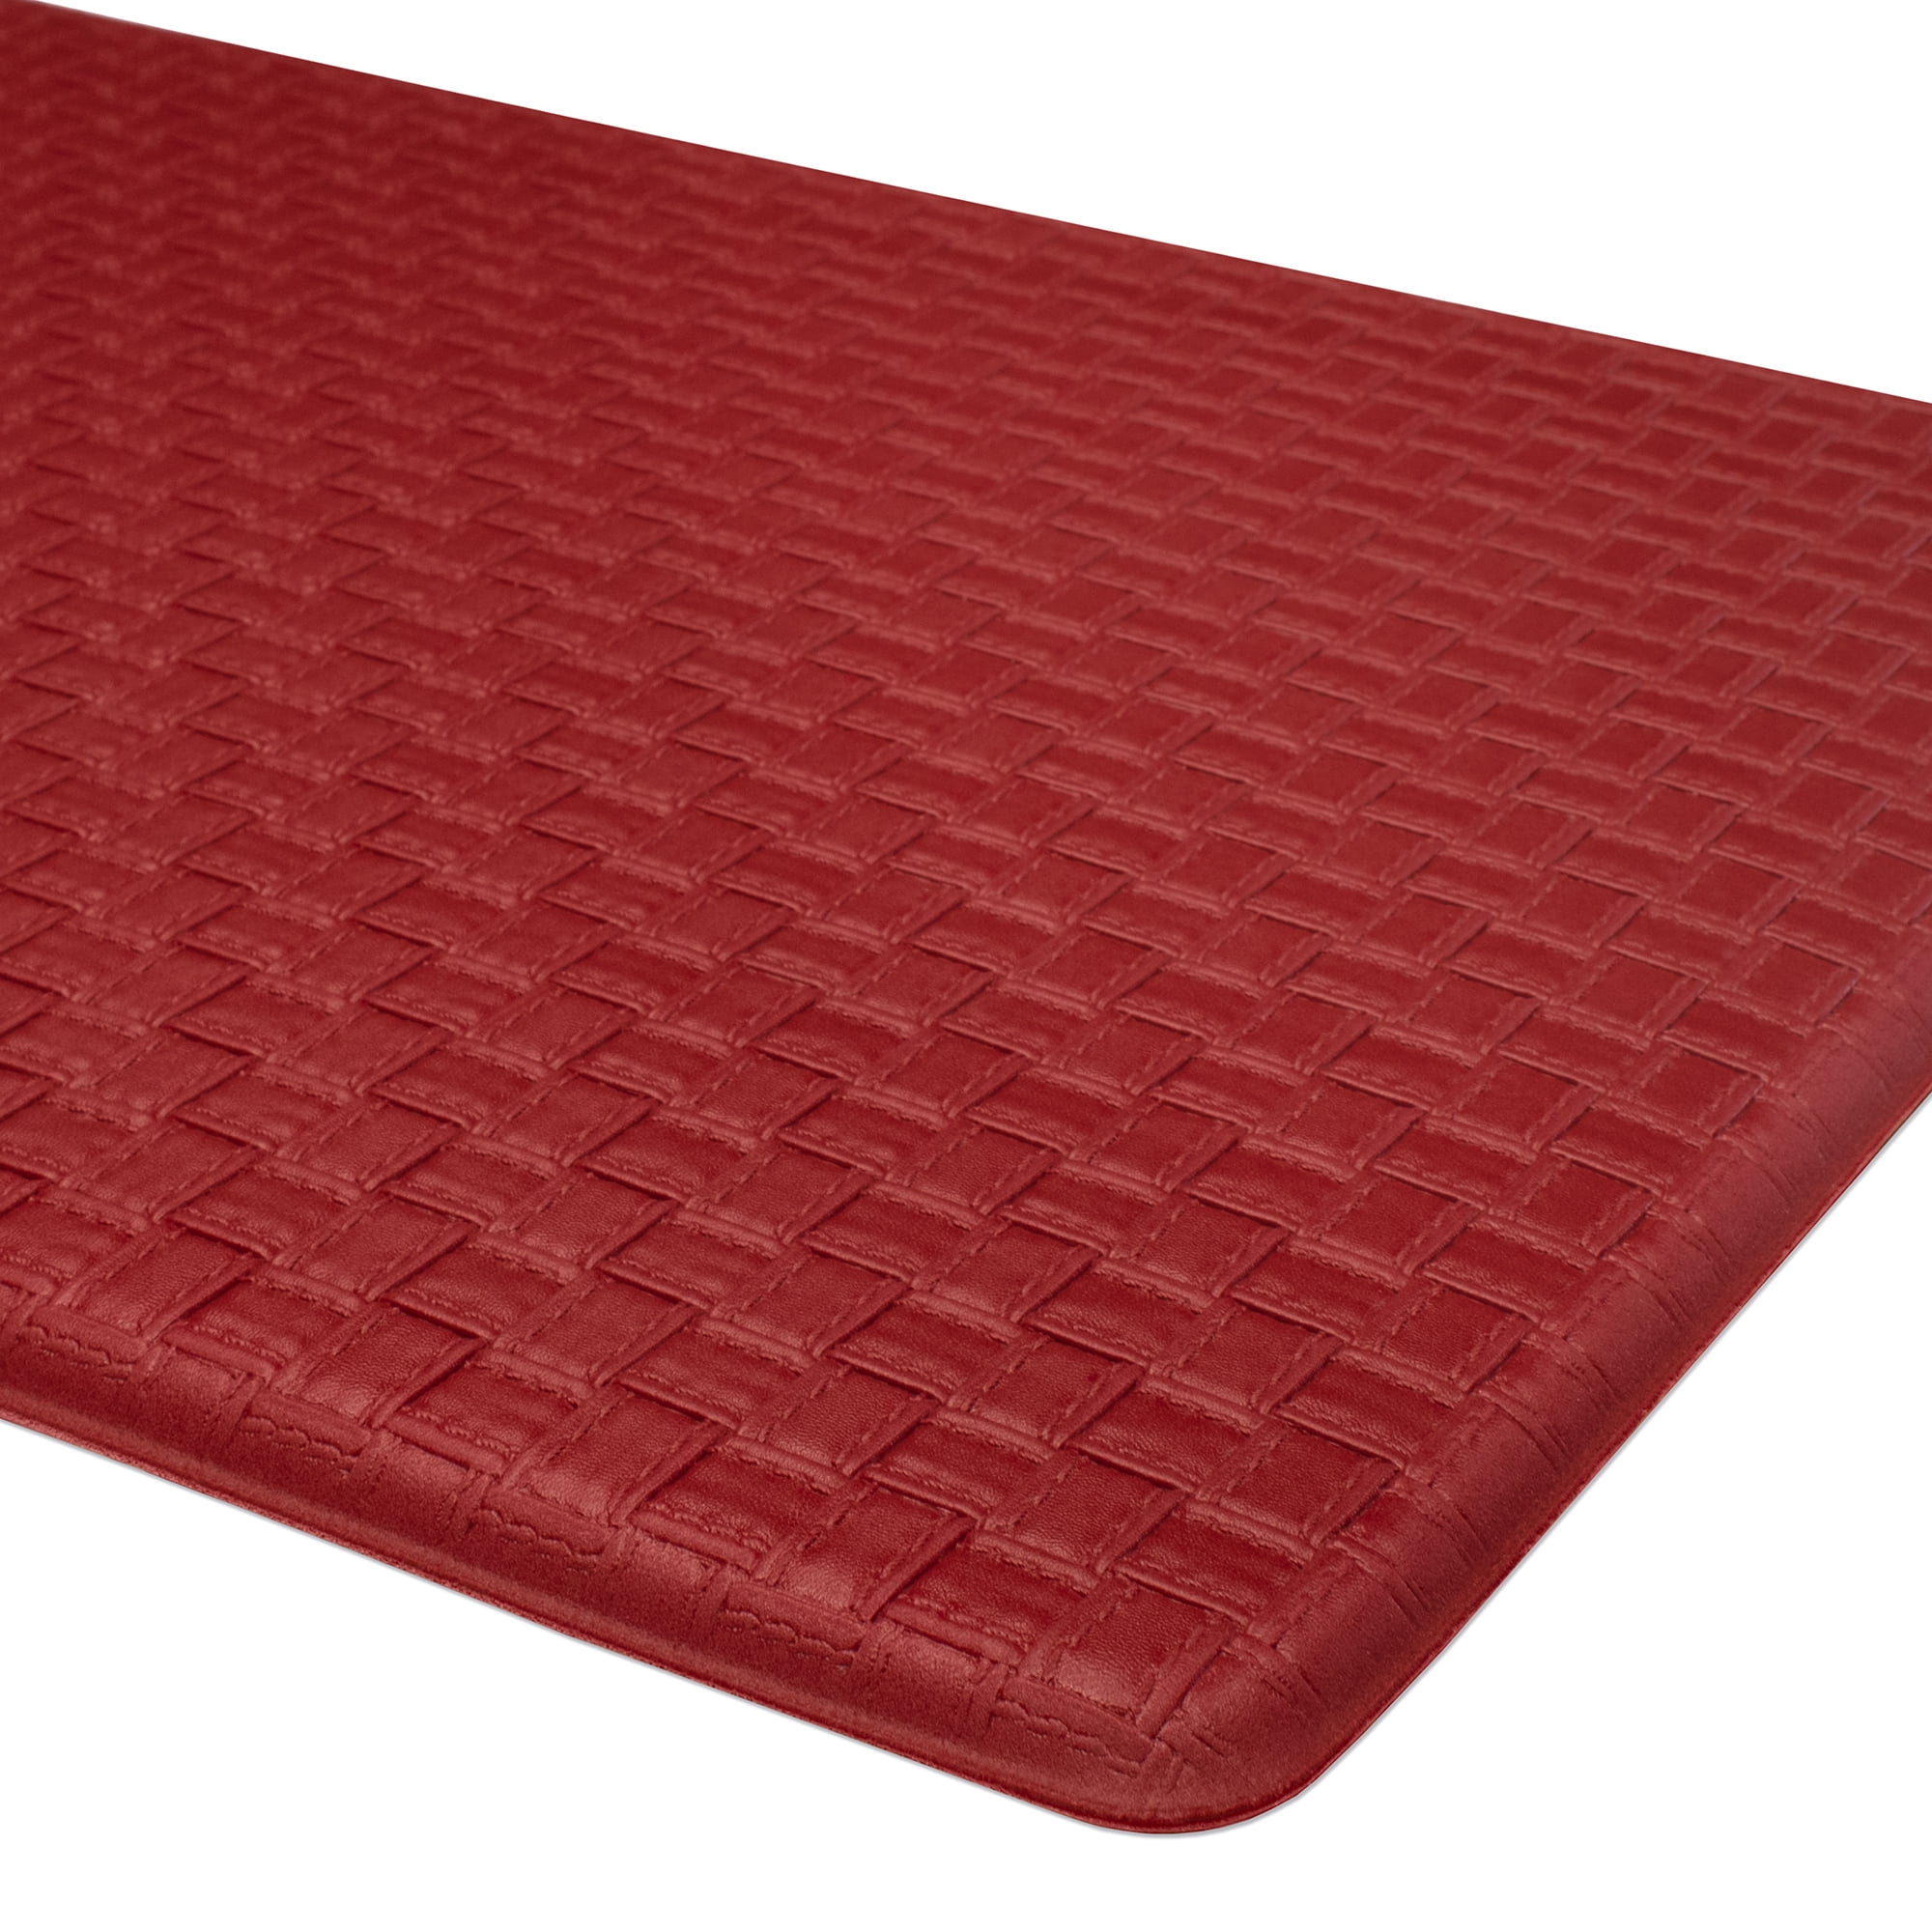 Embossed Kitchen Mats Cushioned Anti Fatigue, Non-Slip Leather-Like Kitchen Floor  Mat, Eco-Friendly PVC Foam, Waterproof Anti-Fatigue Mat for Kitchen,  Office, Sink, Laundry, 20 W 39 L, Burgundy 